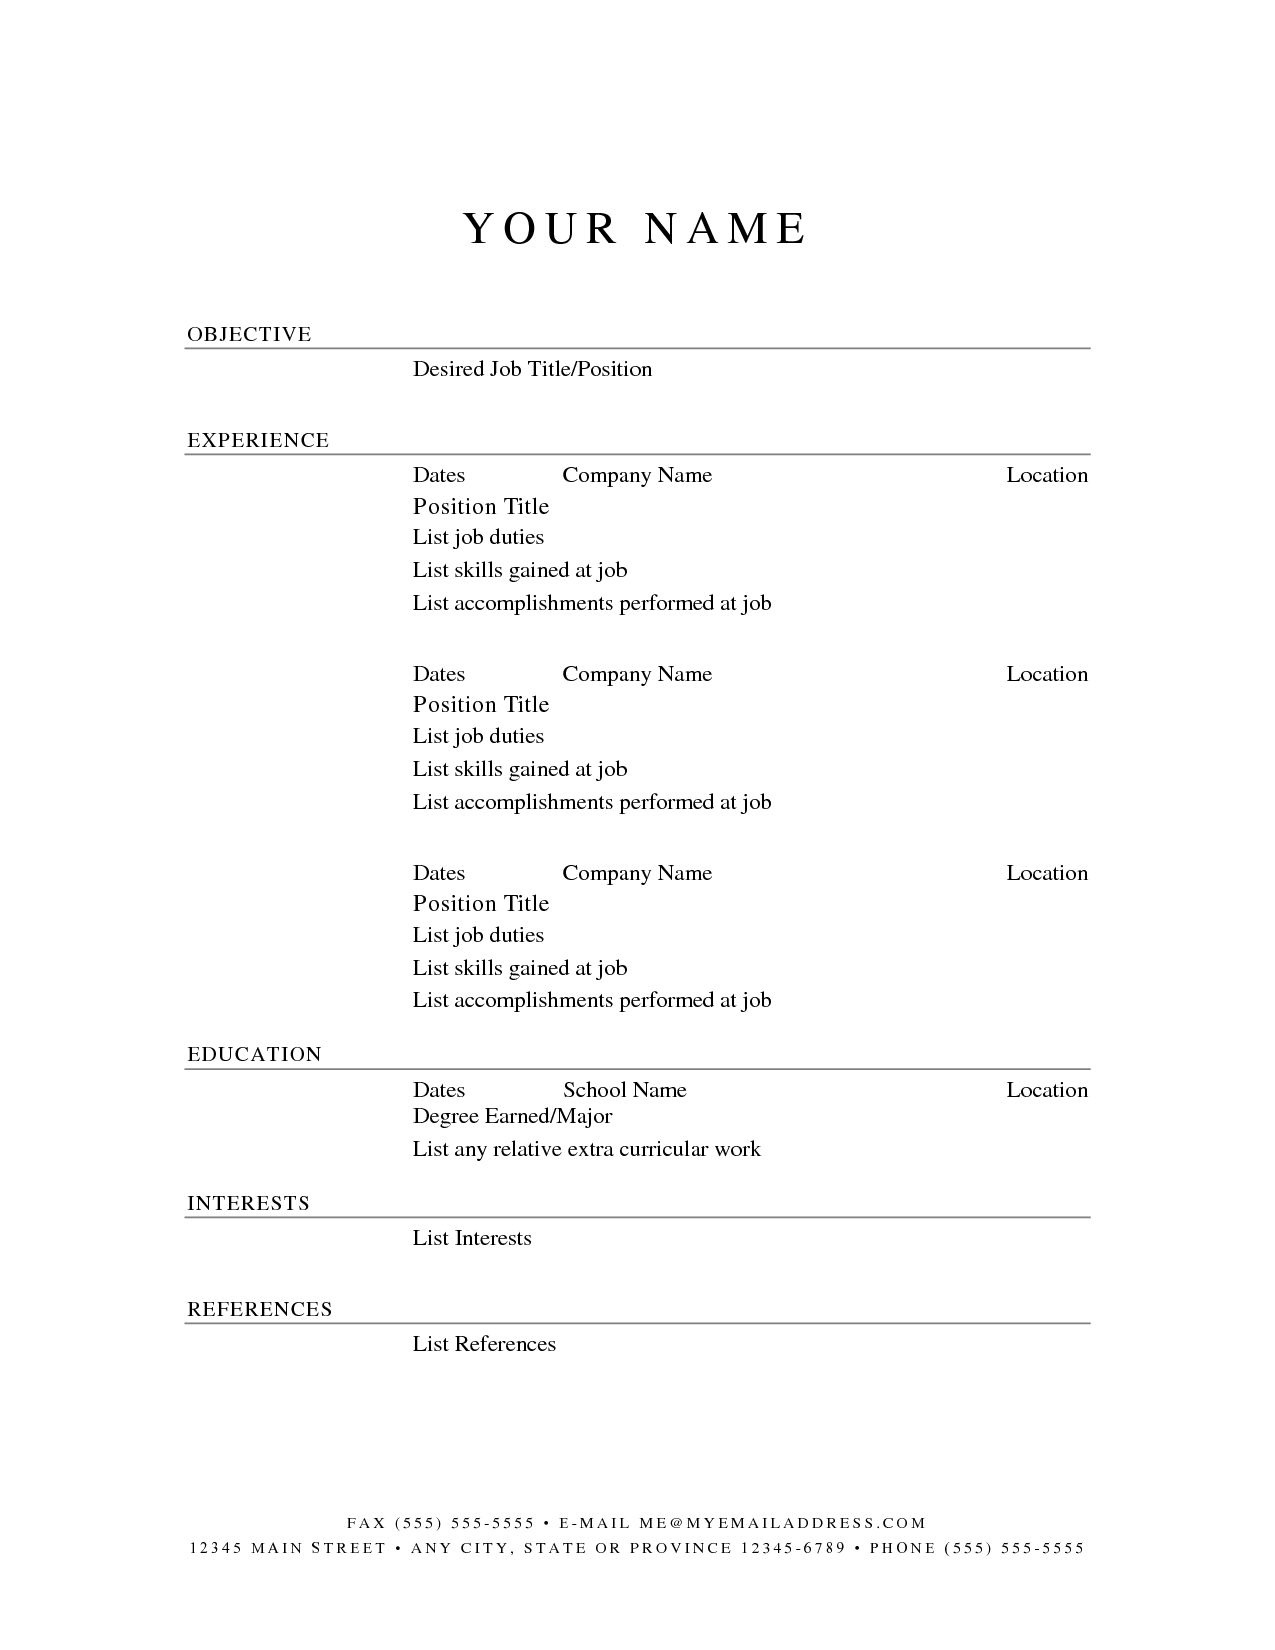 Free Resume Templates Online To Print - Demir.iso-Consulting.co - Free Online Resume Templates Printable